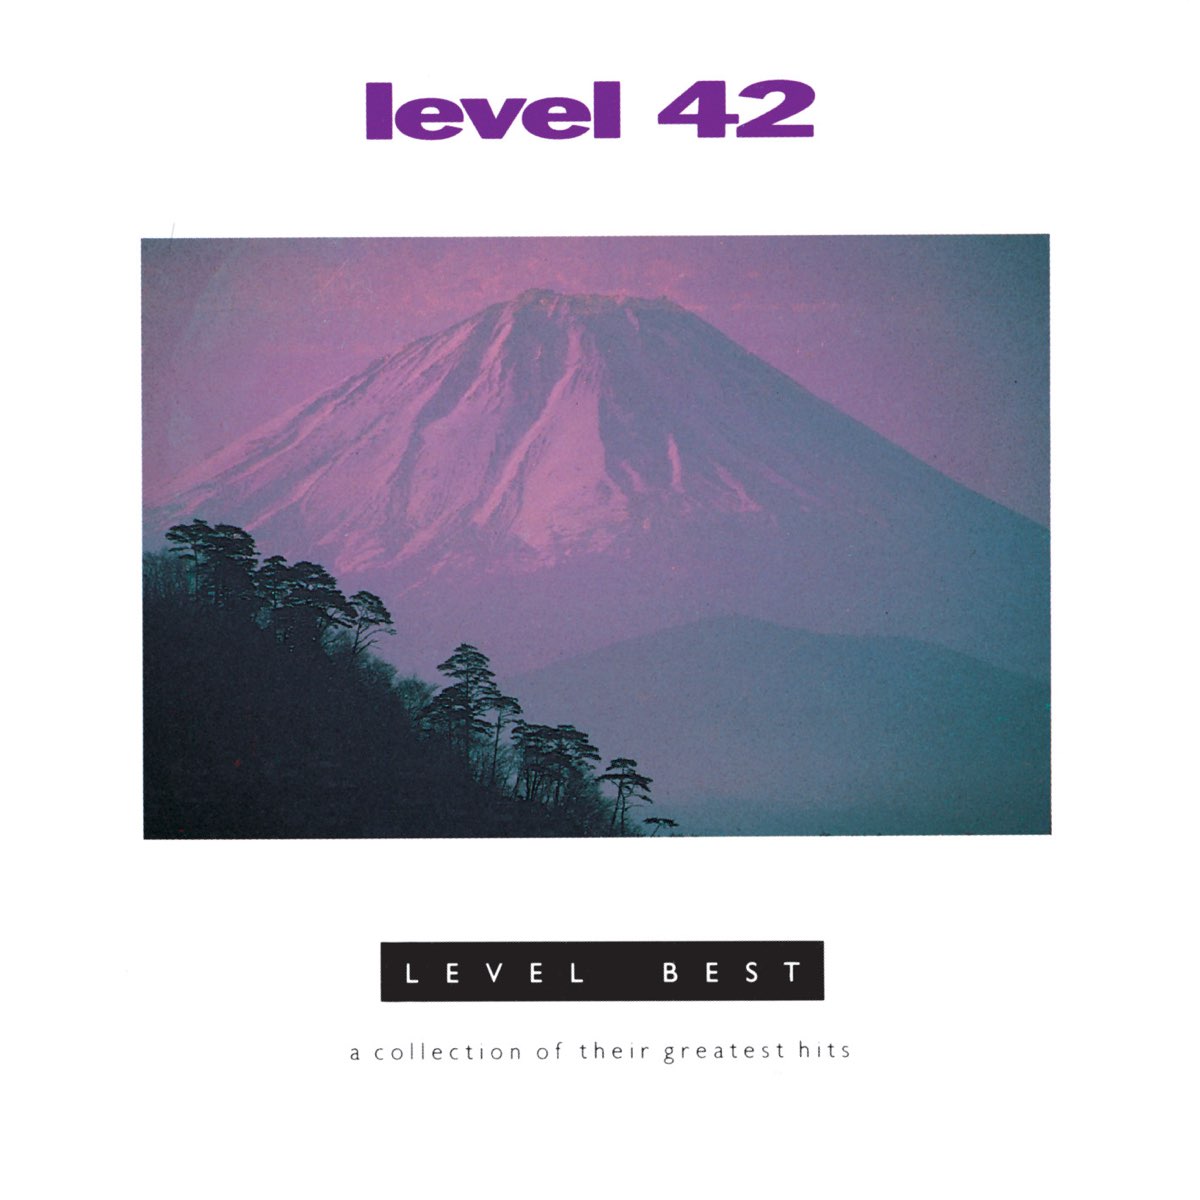 Best levels. Level 42. Level 42 Running in the Family. Картинки Level 42 something about you. Level 42 - children say.